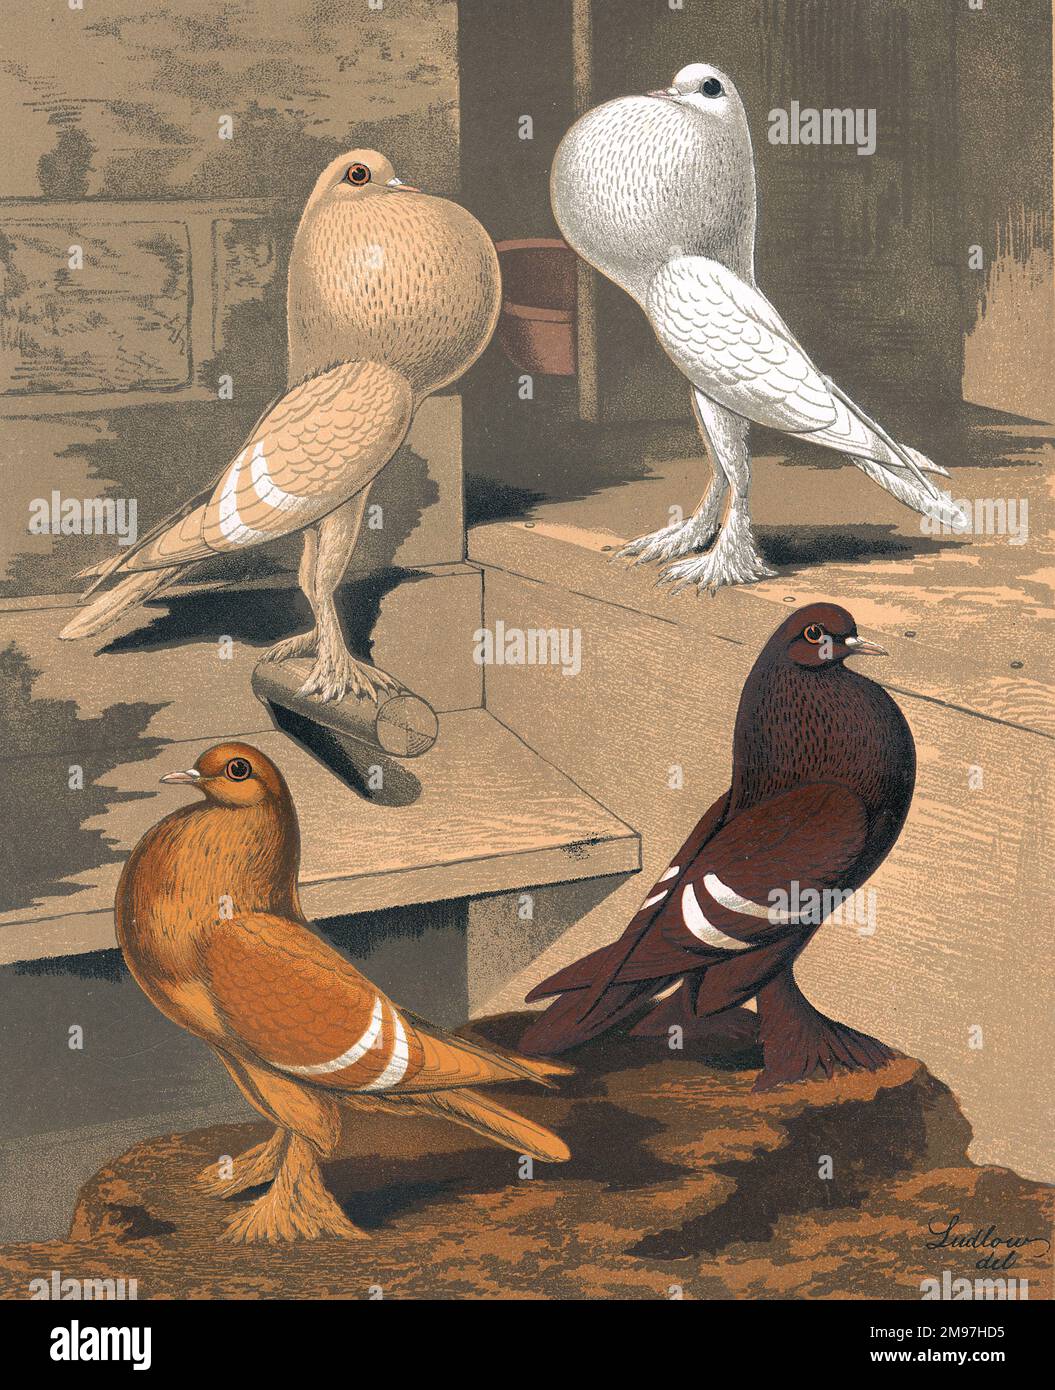 A group portrait featuring one cream and one white Pigmy Pouters, with one yellow, and one red Isabels standing in their coop. The portrait illustrates their identifiable characteristics as variants from the fancy breed of pigeons. Stock Photo